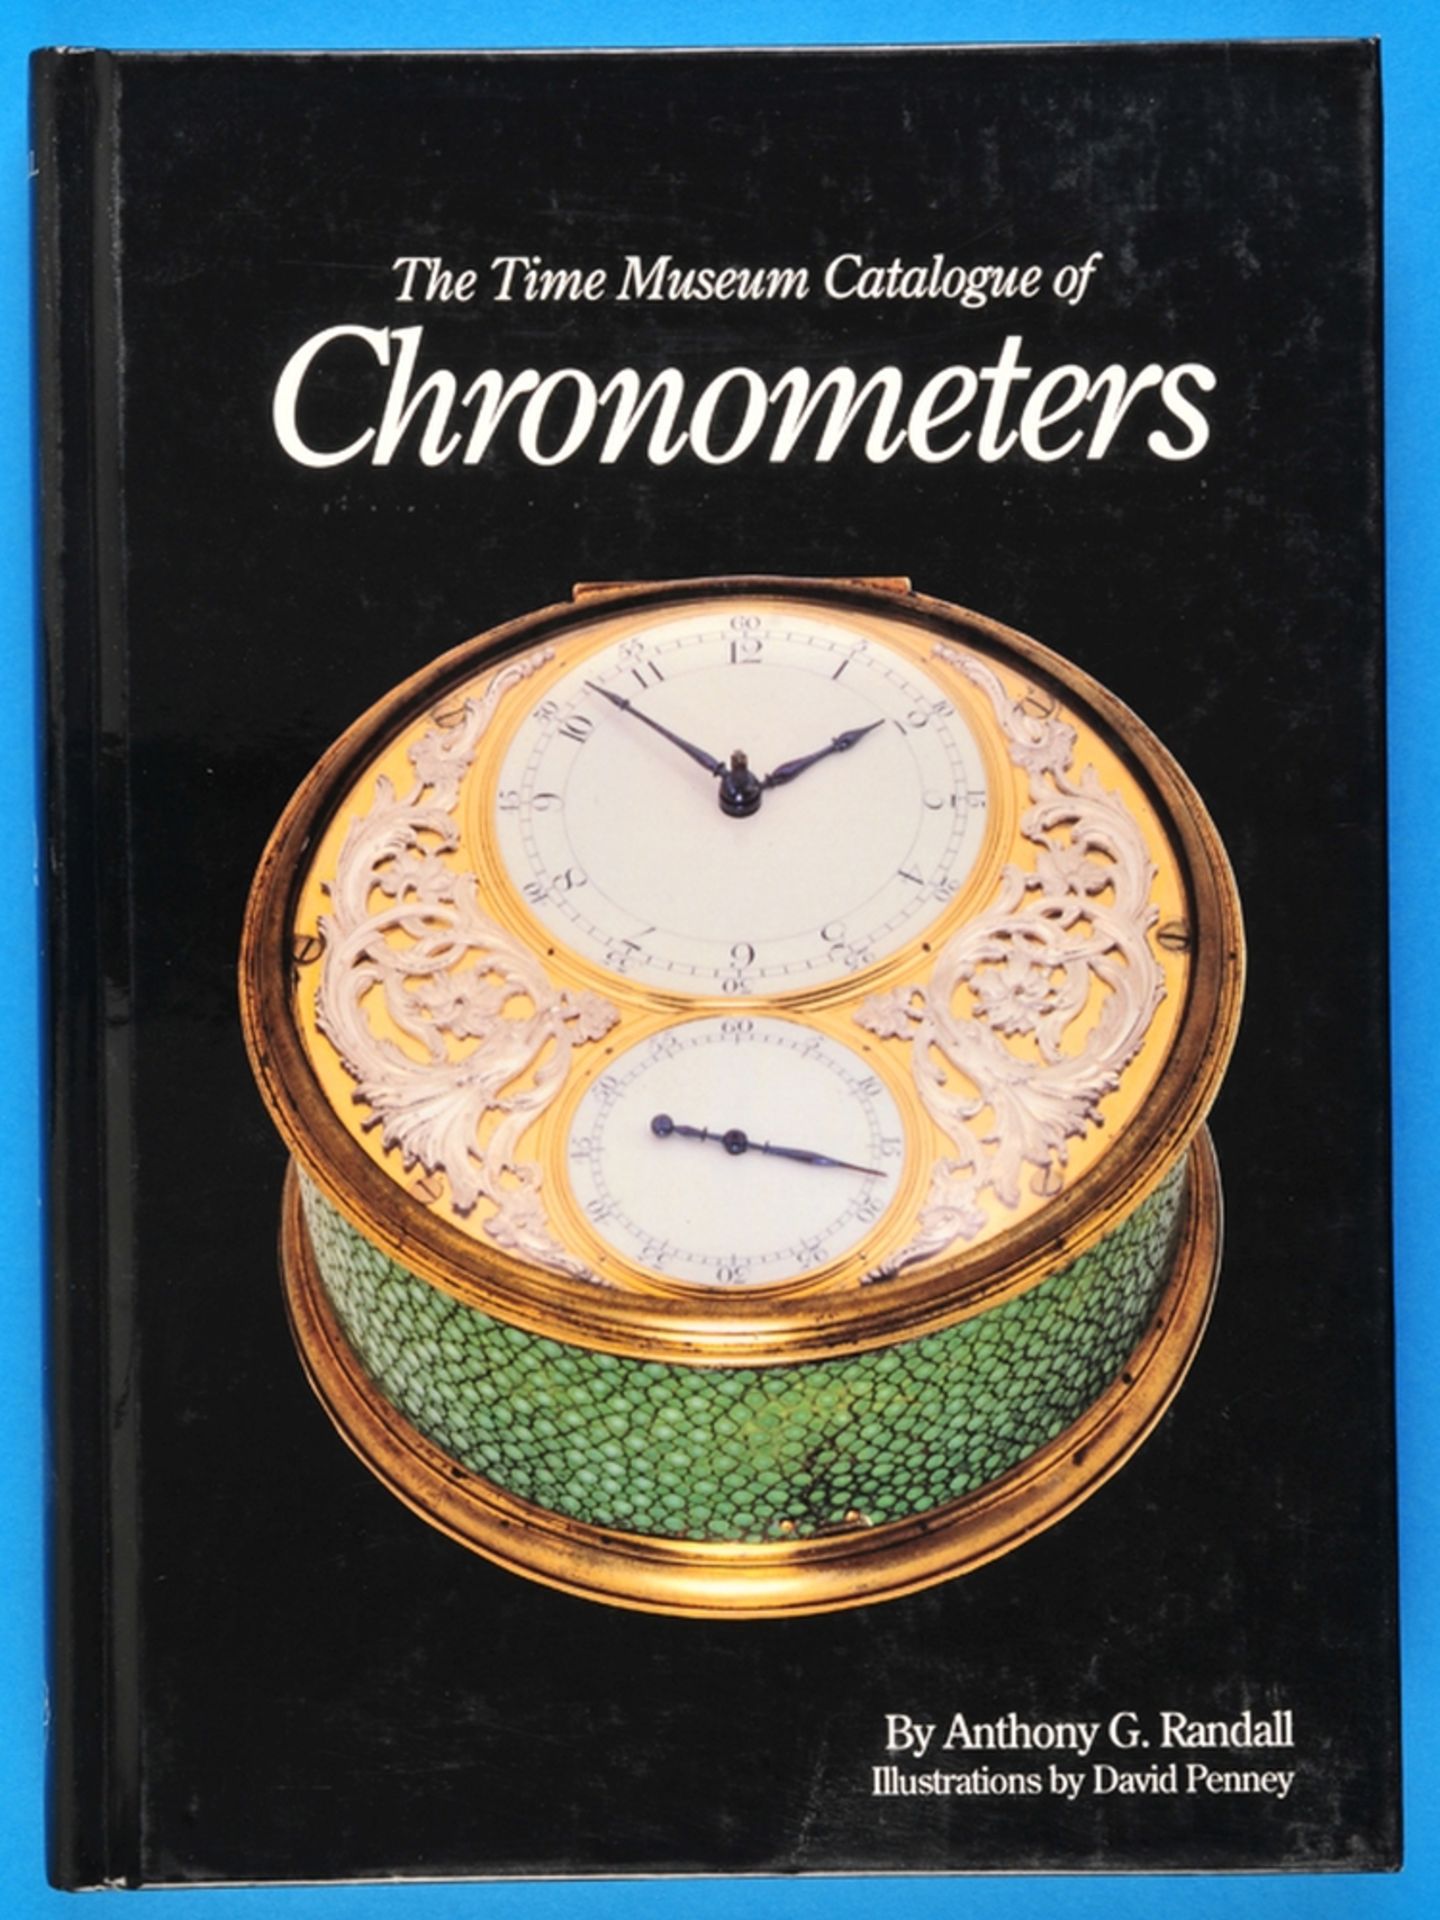 Anthony G. Randall, The Time Museum Cataloque of Chronometers